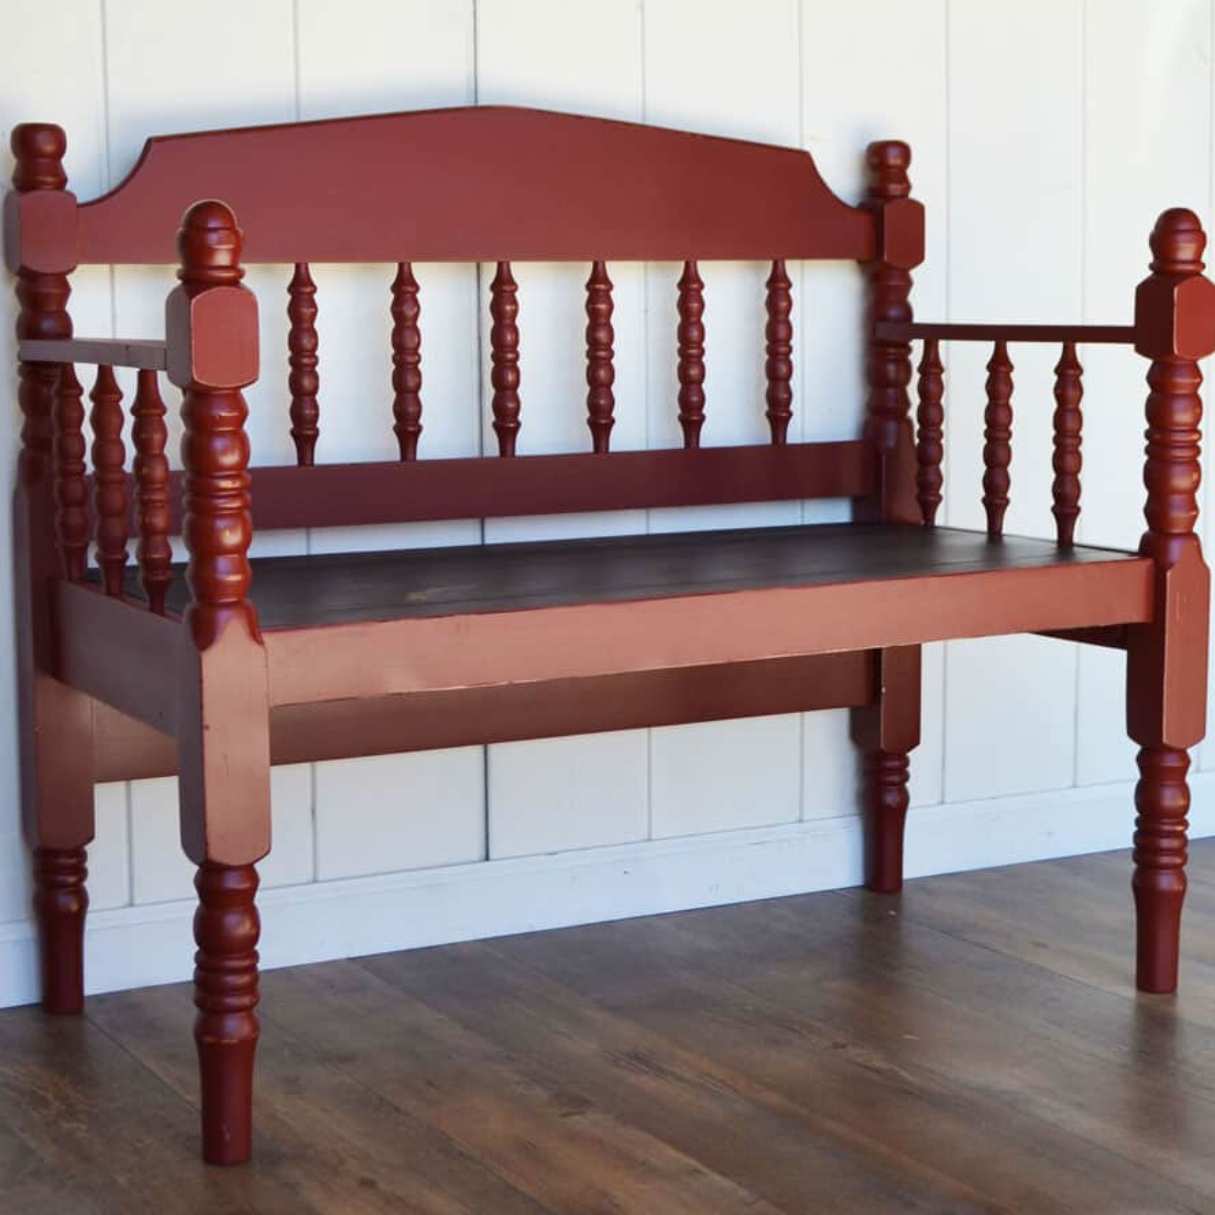 How To Make A Bench Out Of A Bed Frame